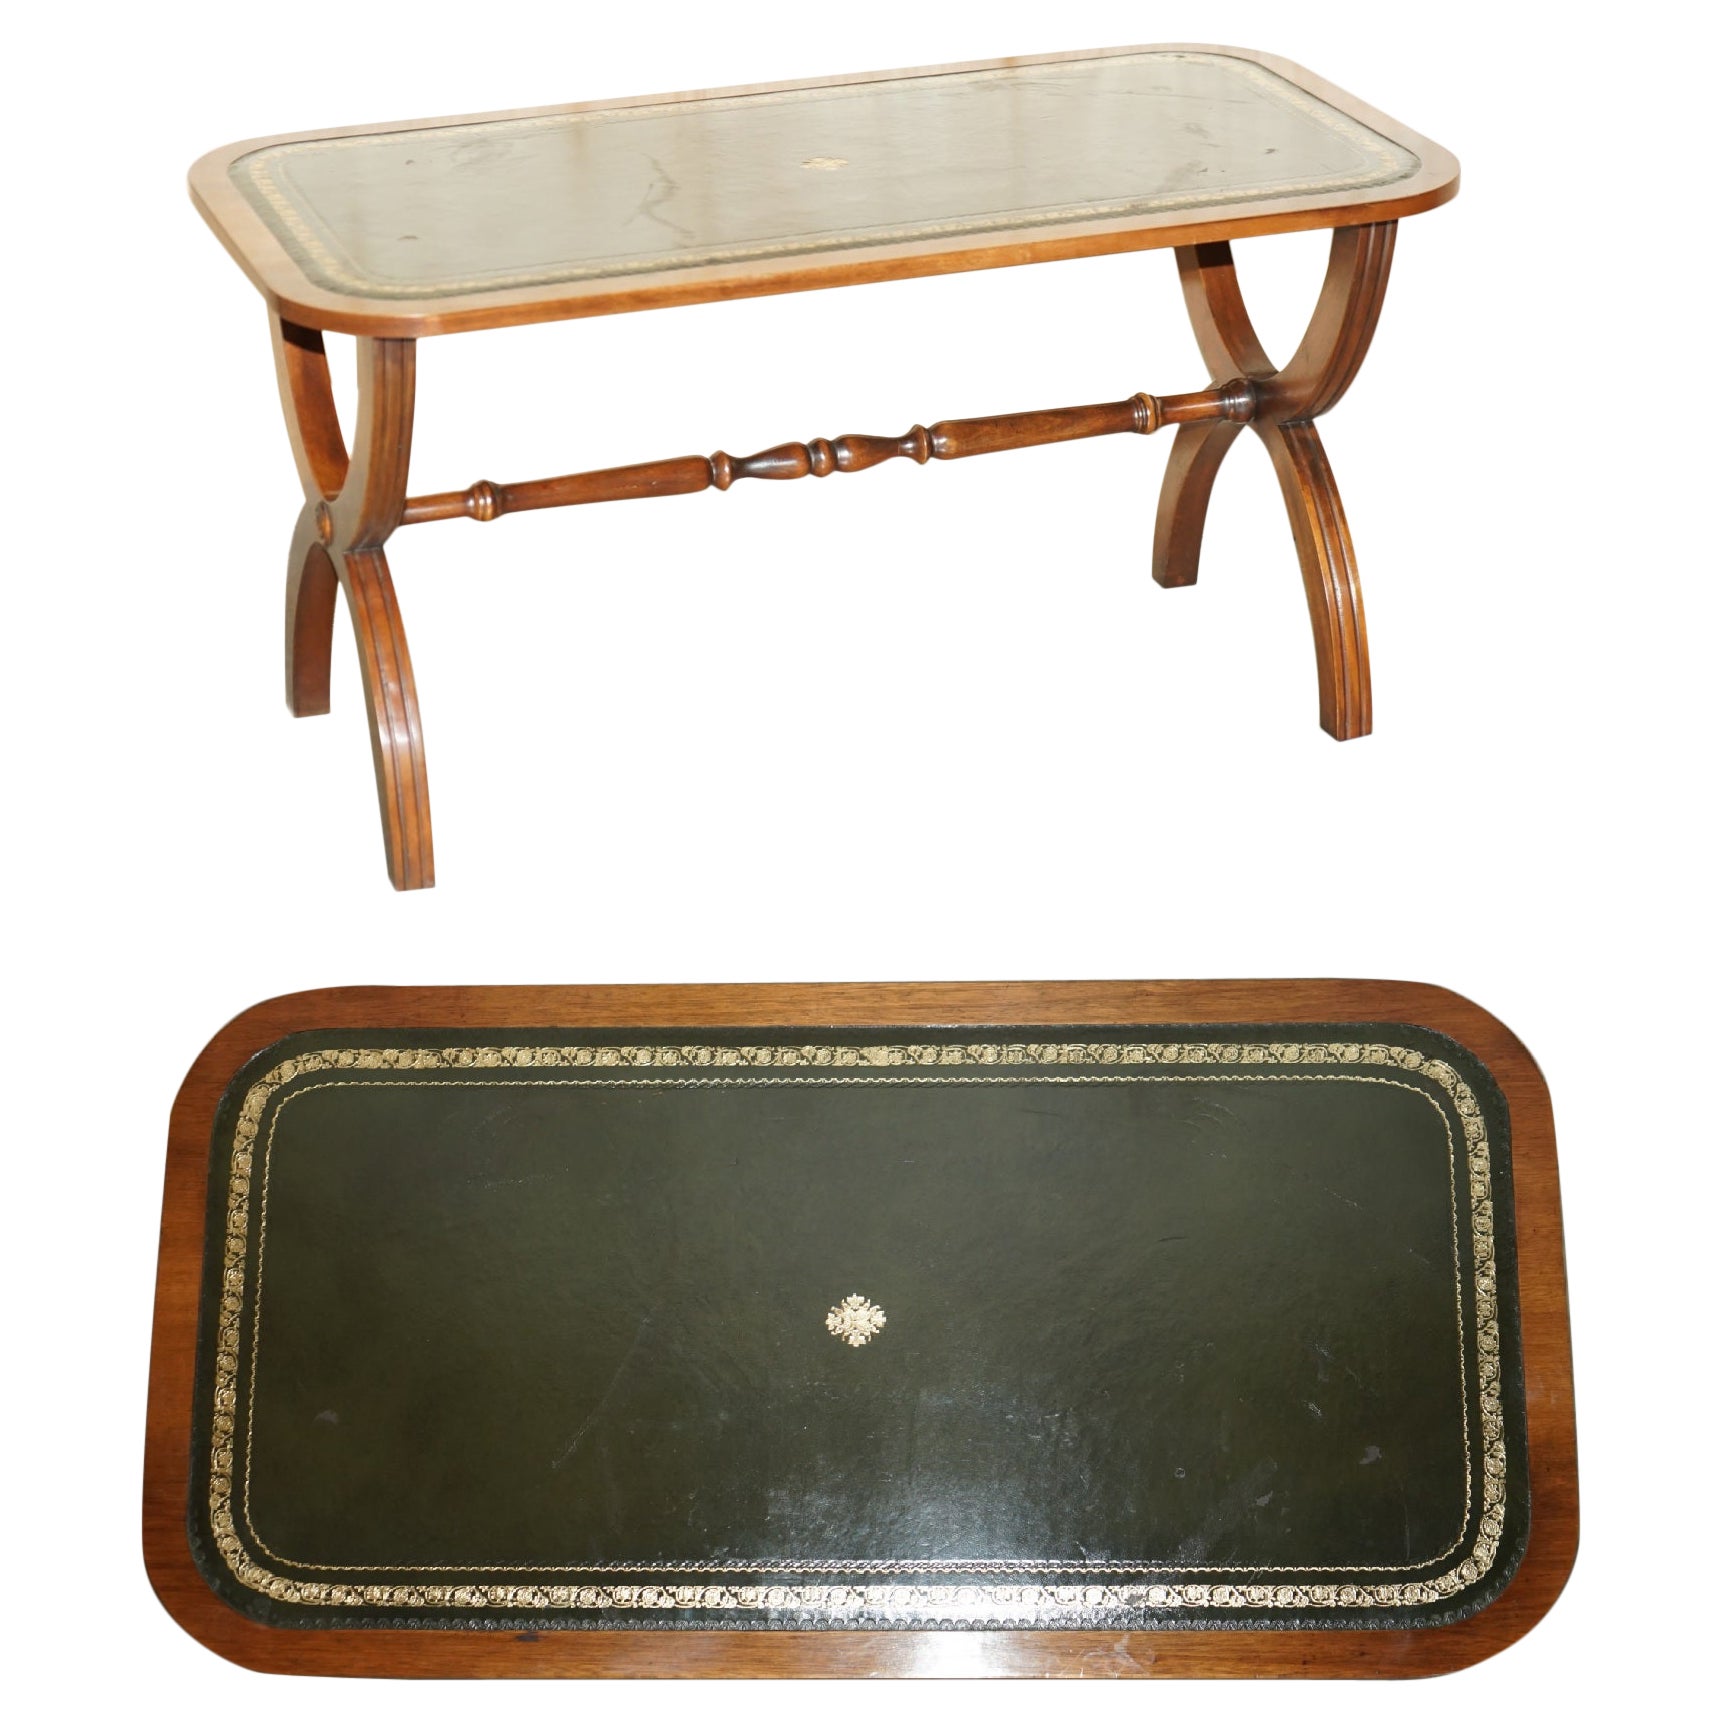 Lovely Vintage Green Leather & Hardwood Bevan Funnell Coffee Table Nice Patina For Sale